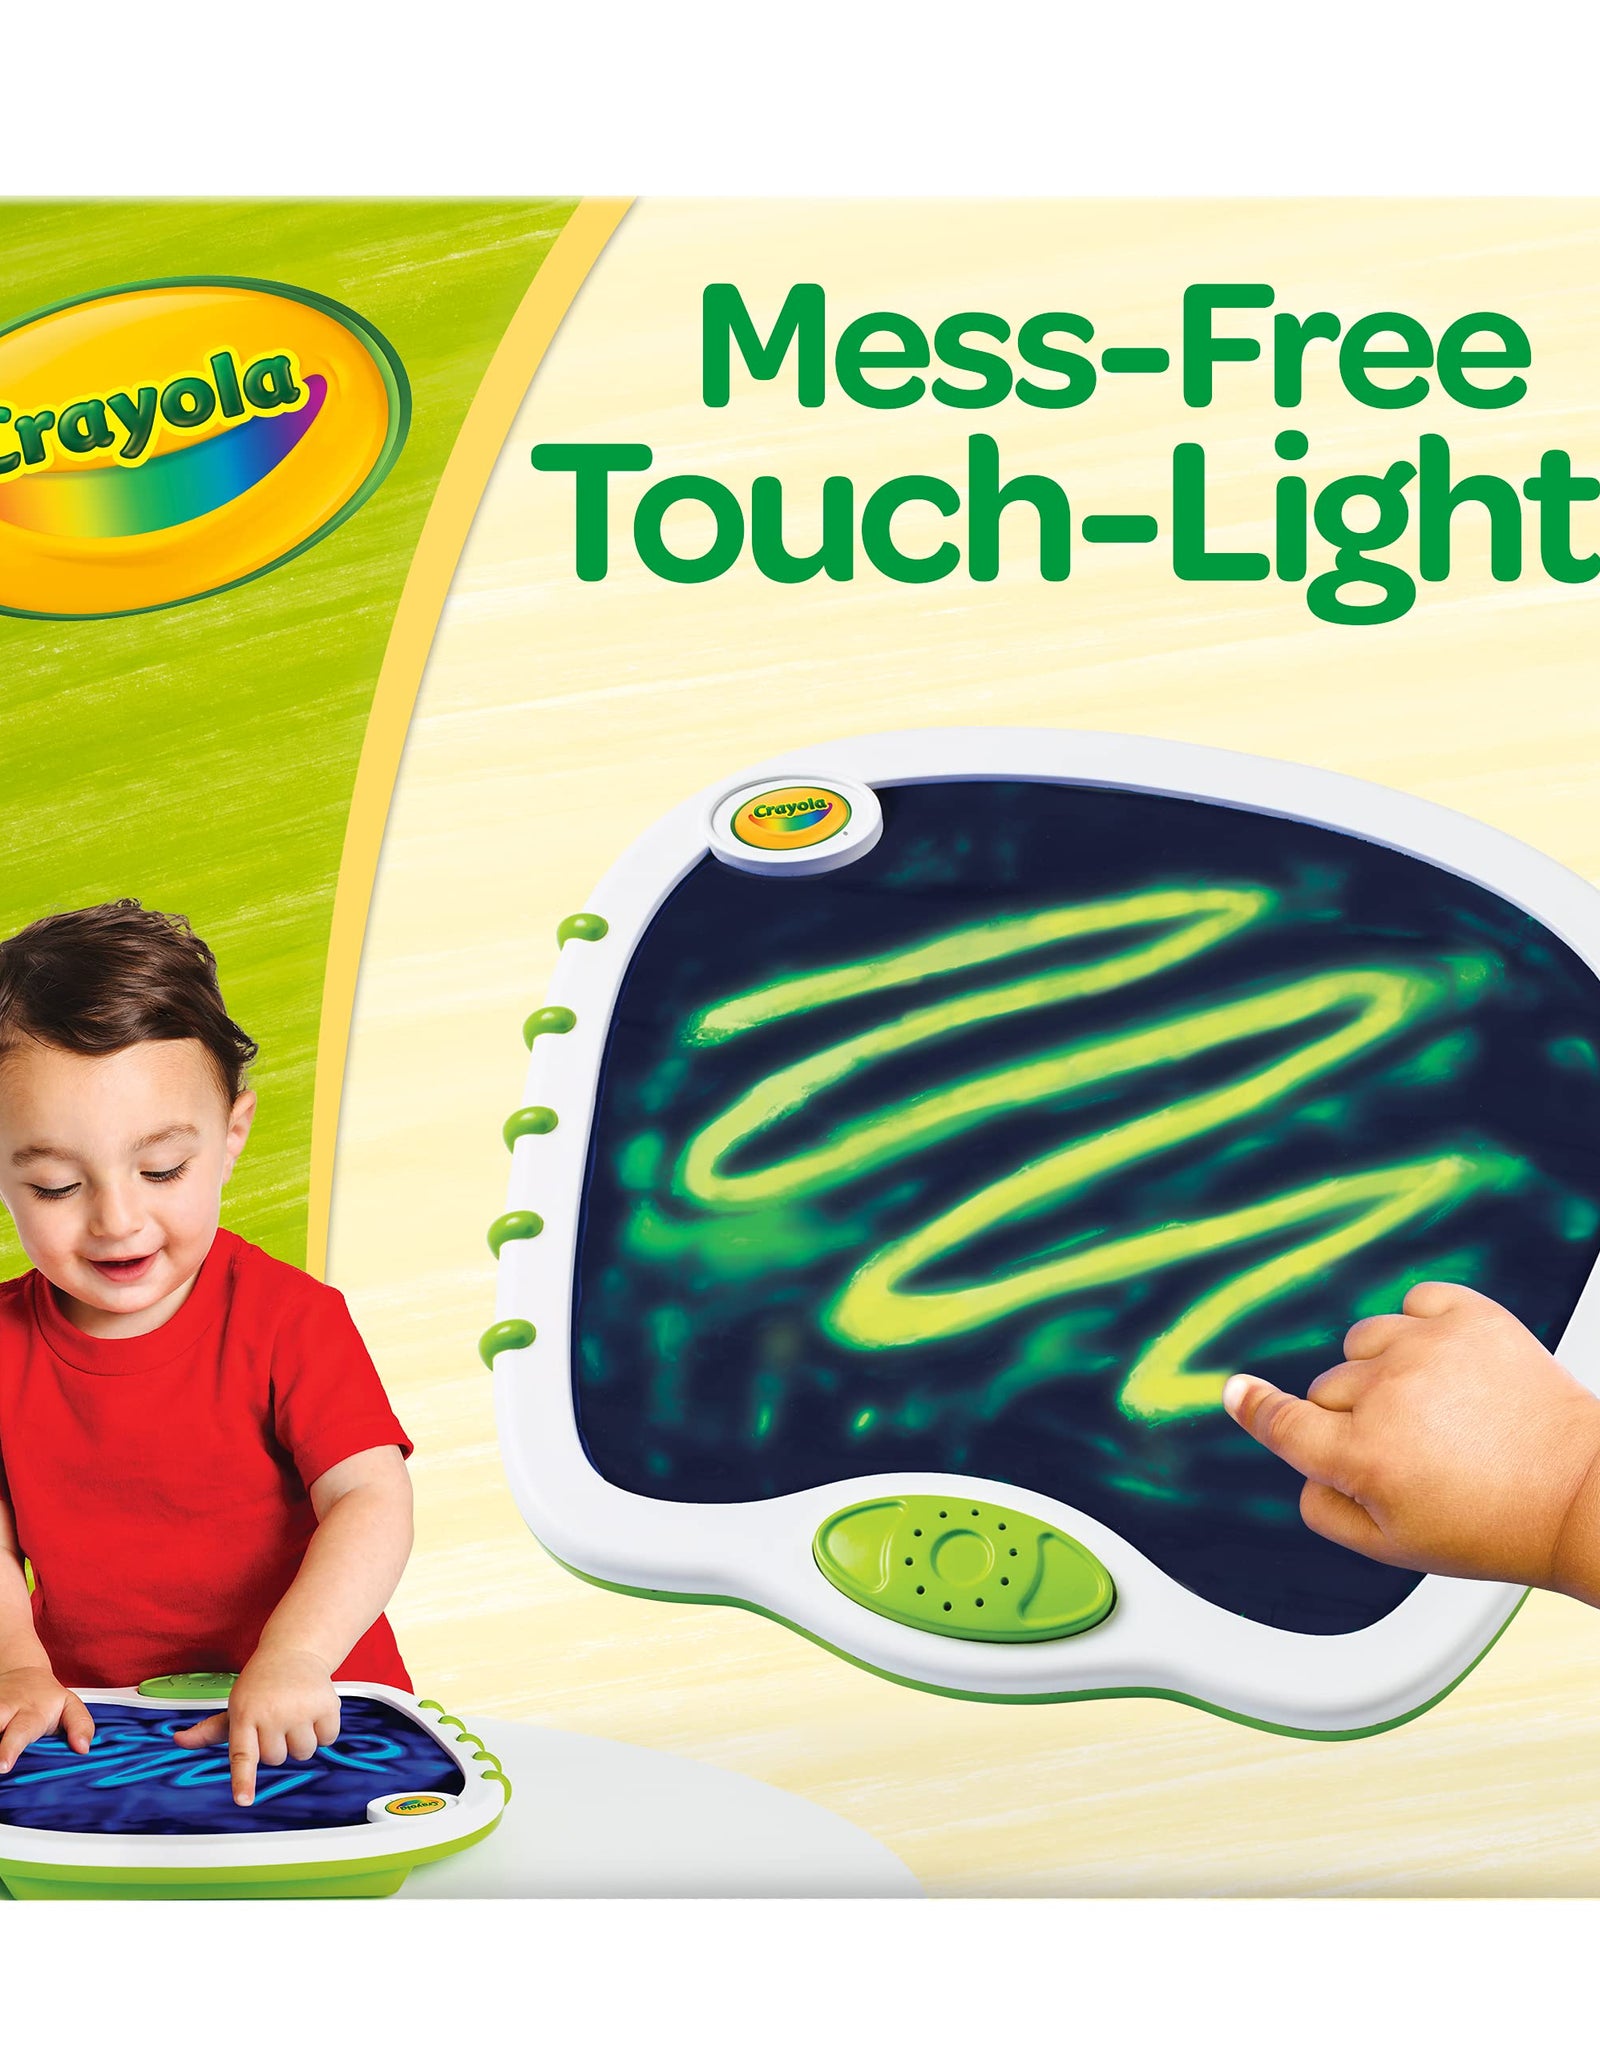 My First Crayola Touch Lights, Musical Doodle Board, Toddler Toy, Gift, White, Green